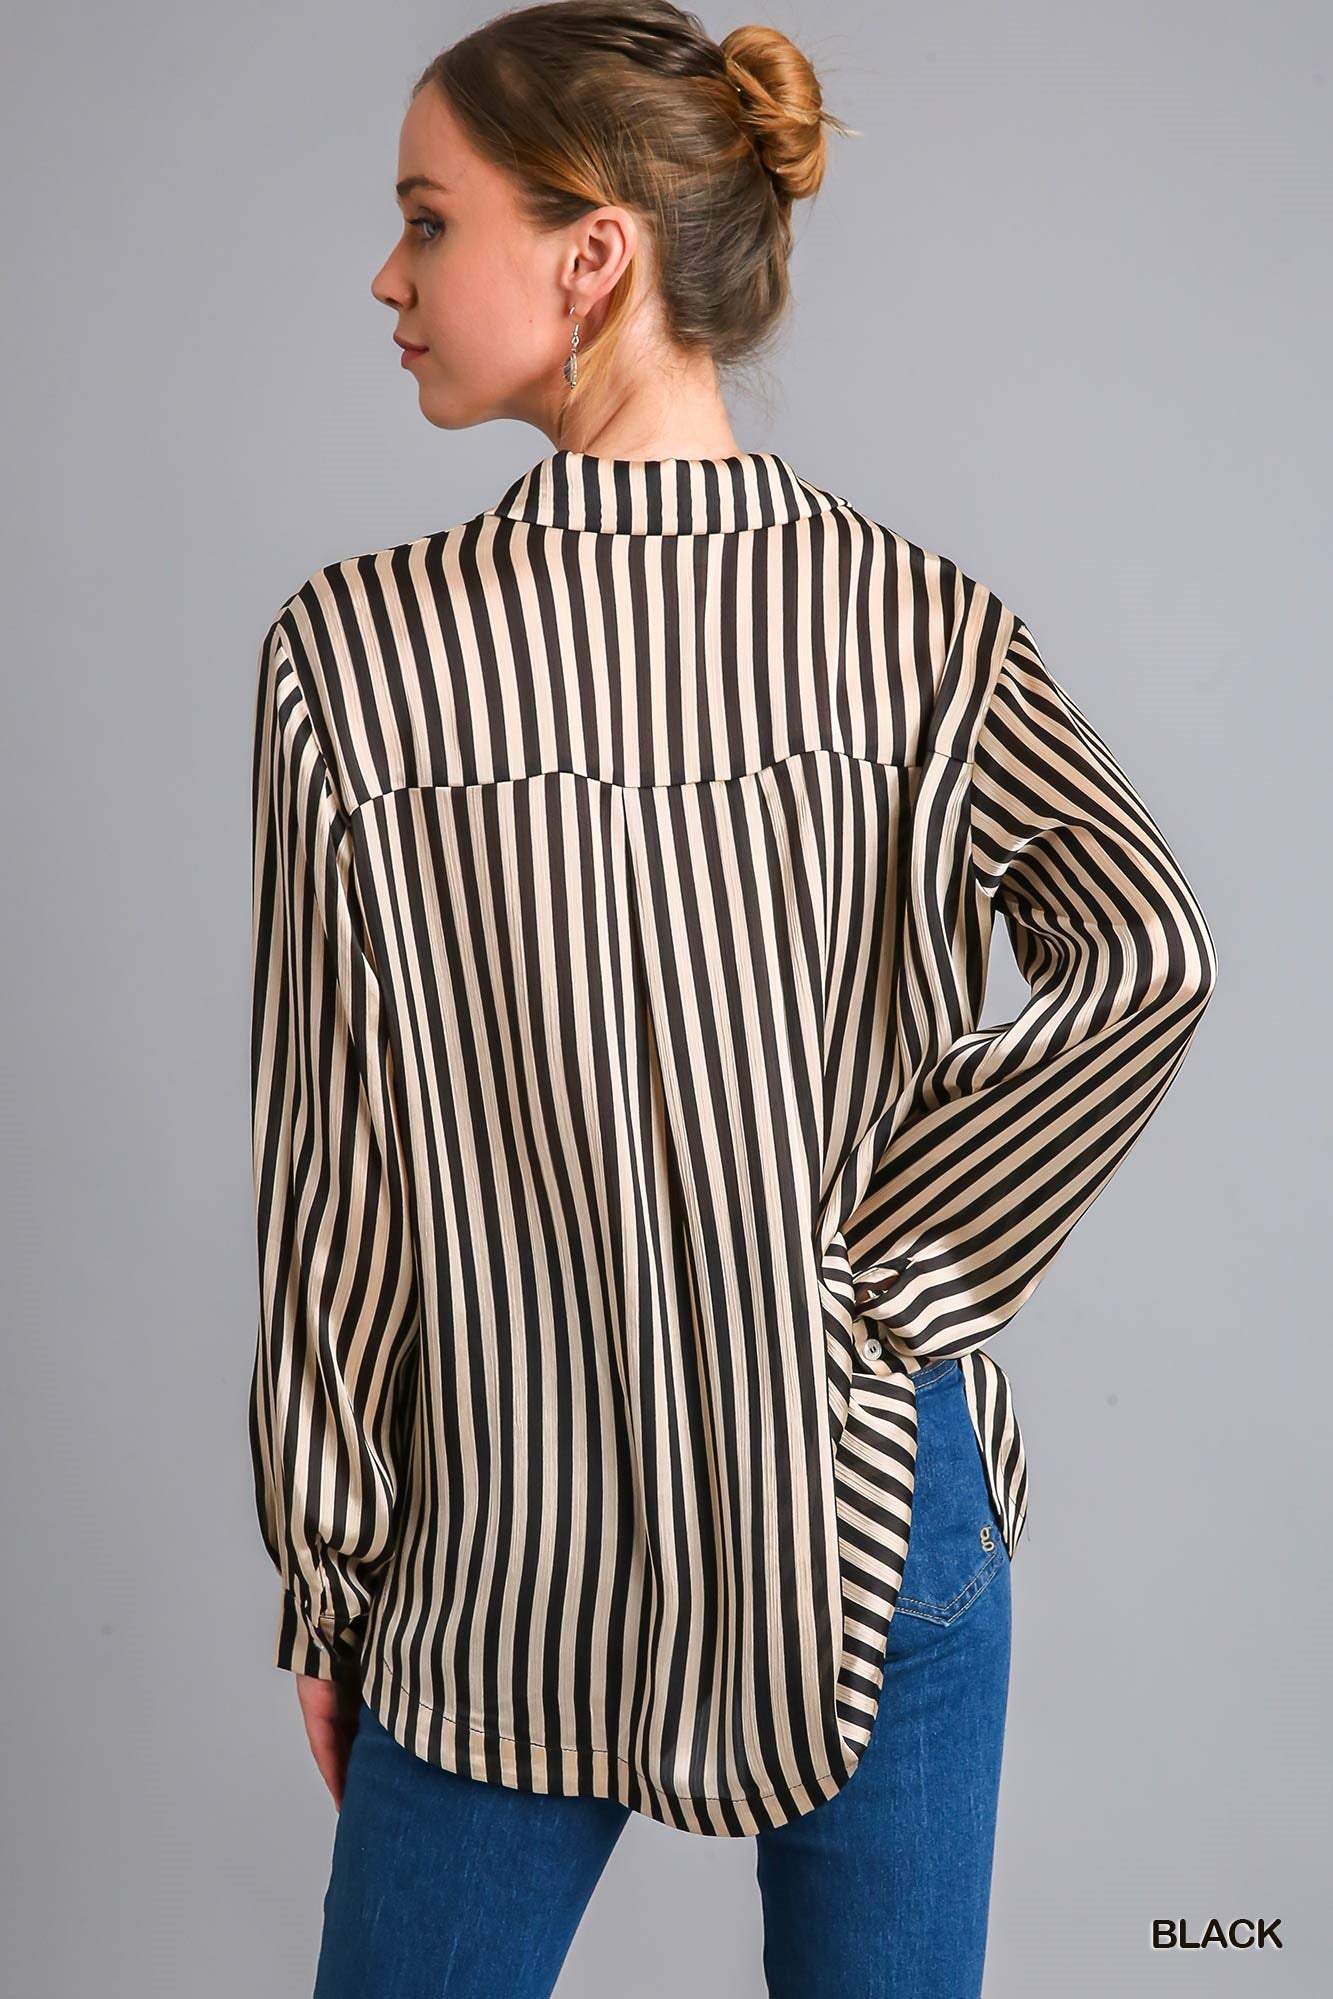 Umgee Satin Stripe Button Down Adjustable Sleeve Top - Roulhac Fashion Boutique